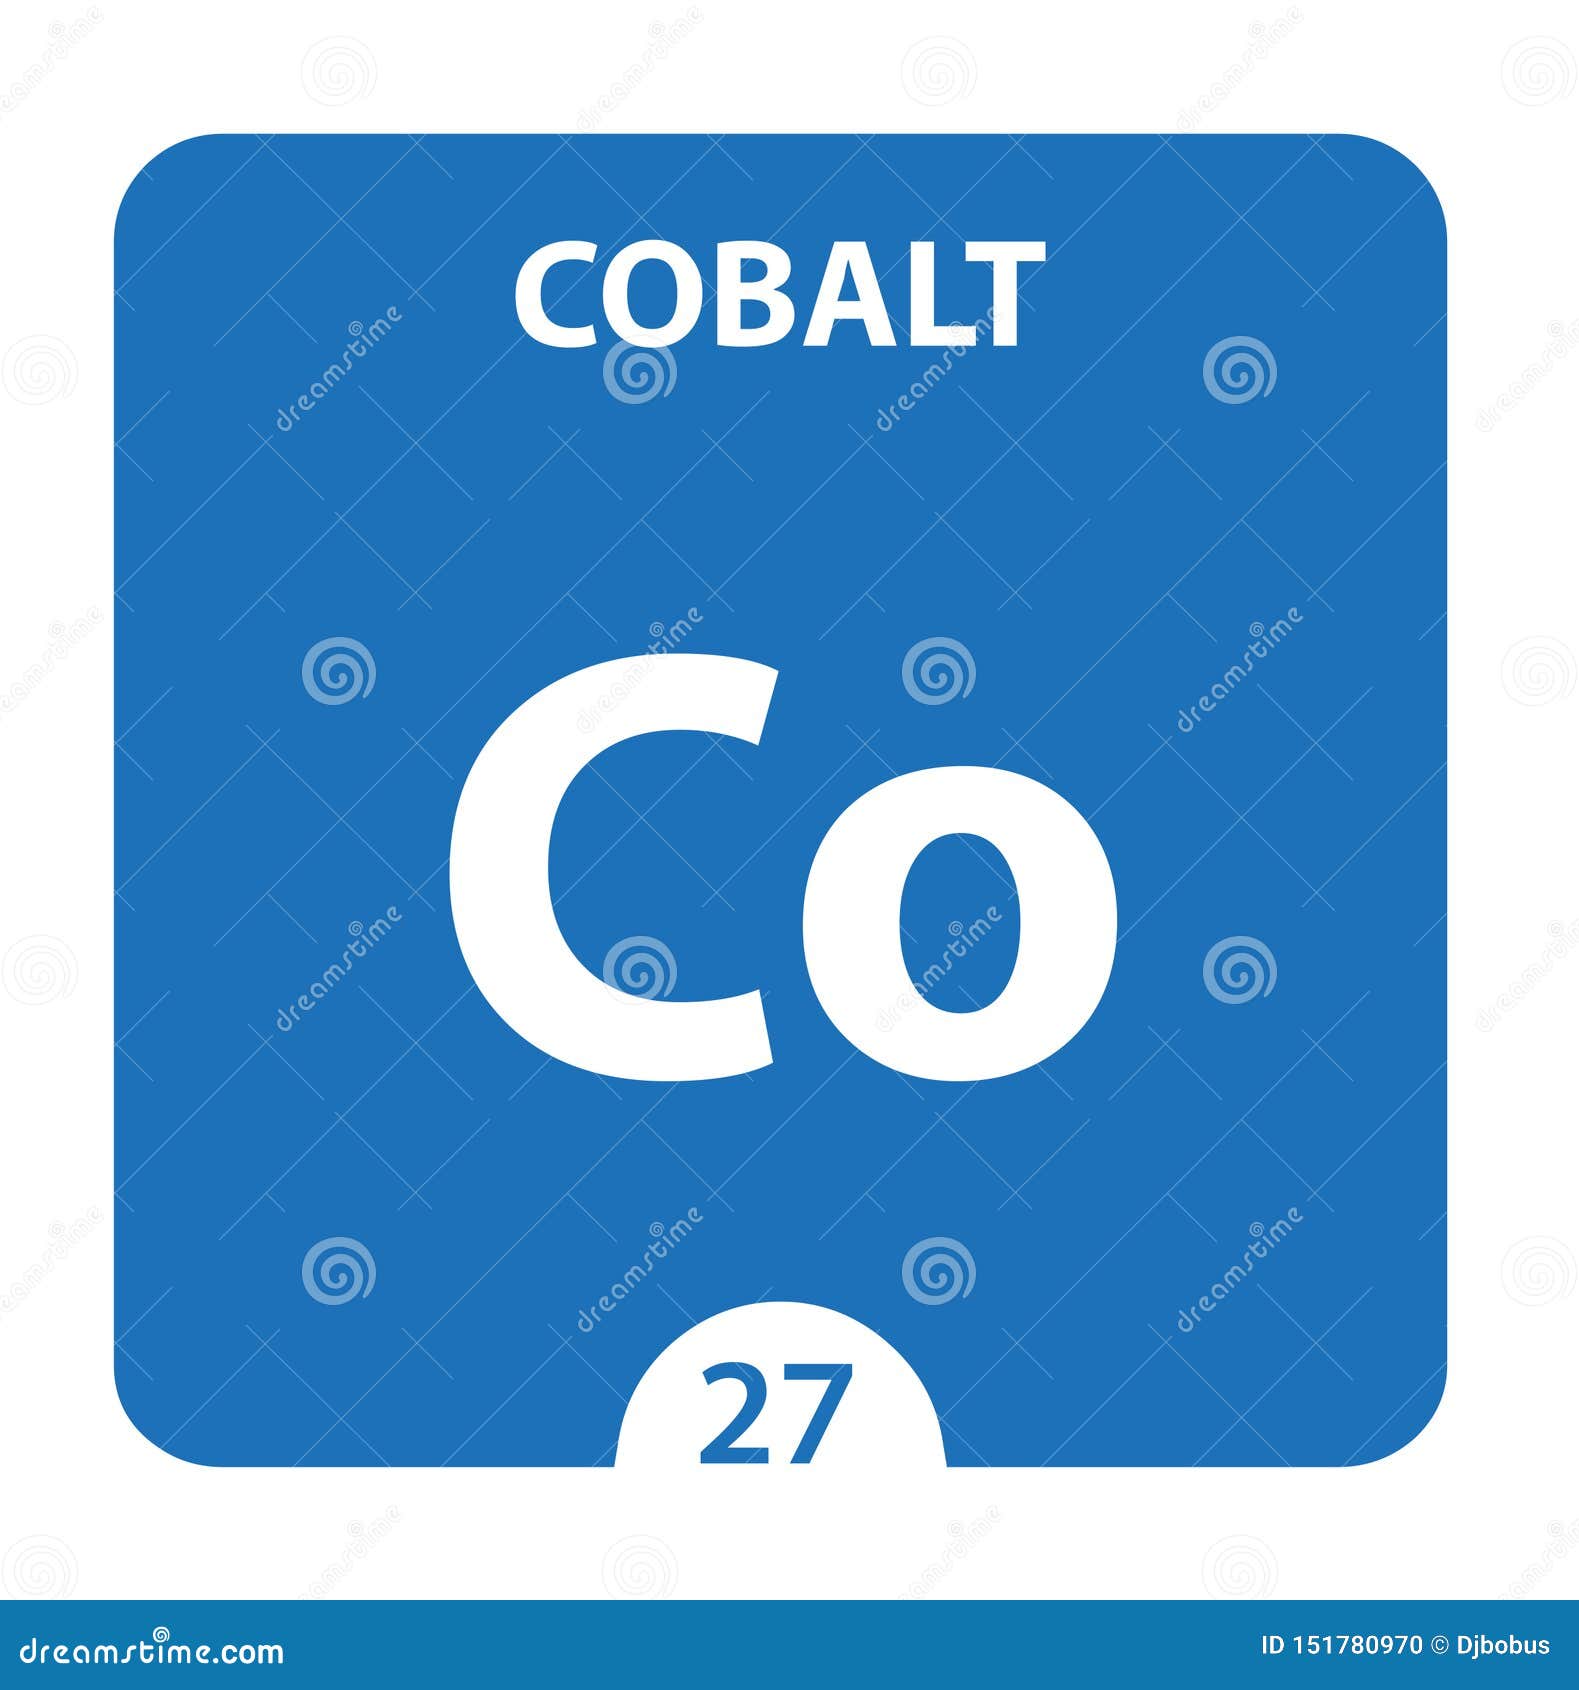 Cobalt symbol. Chemical element of the periodic table. Vector